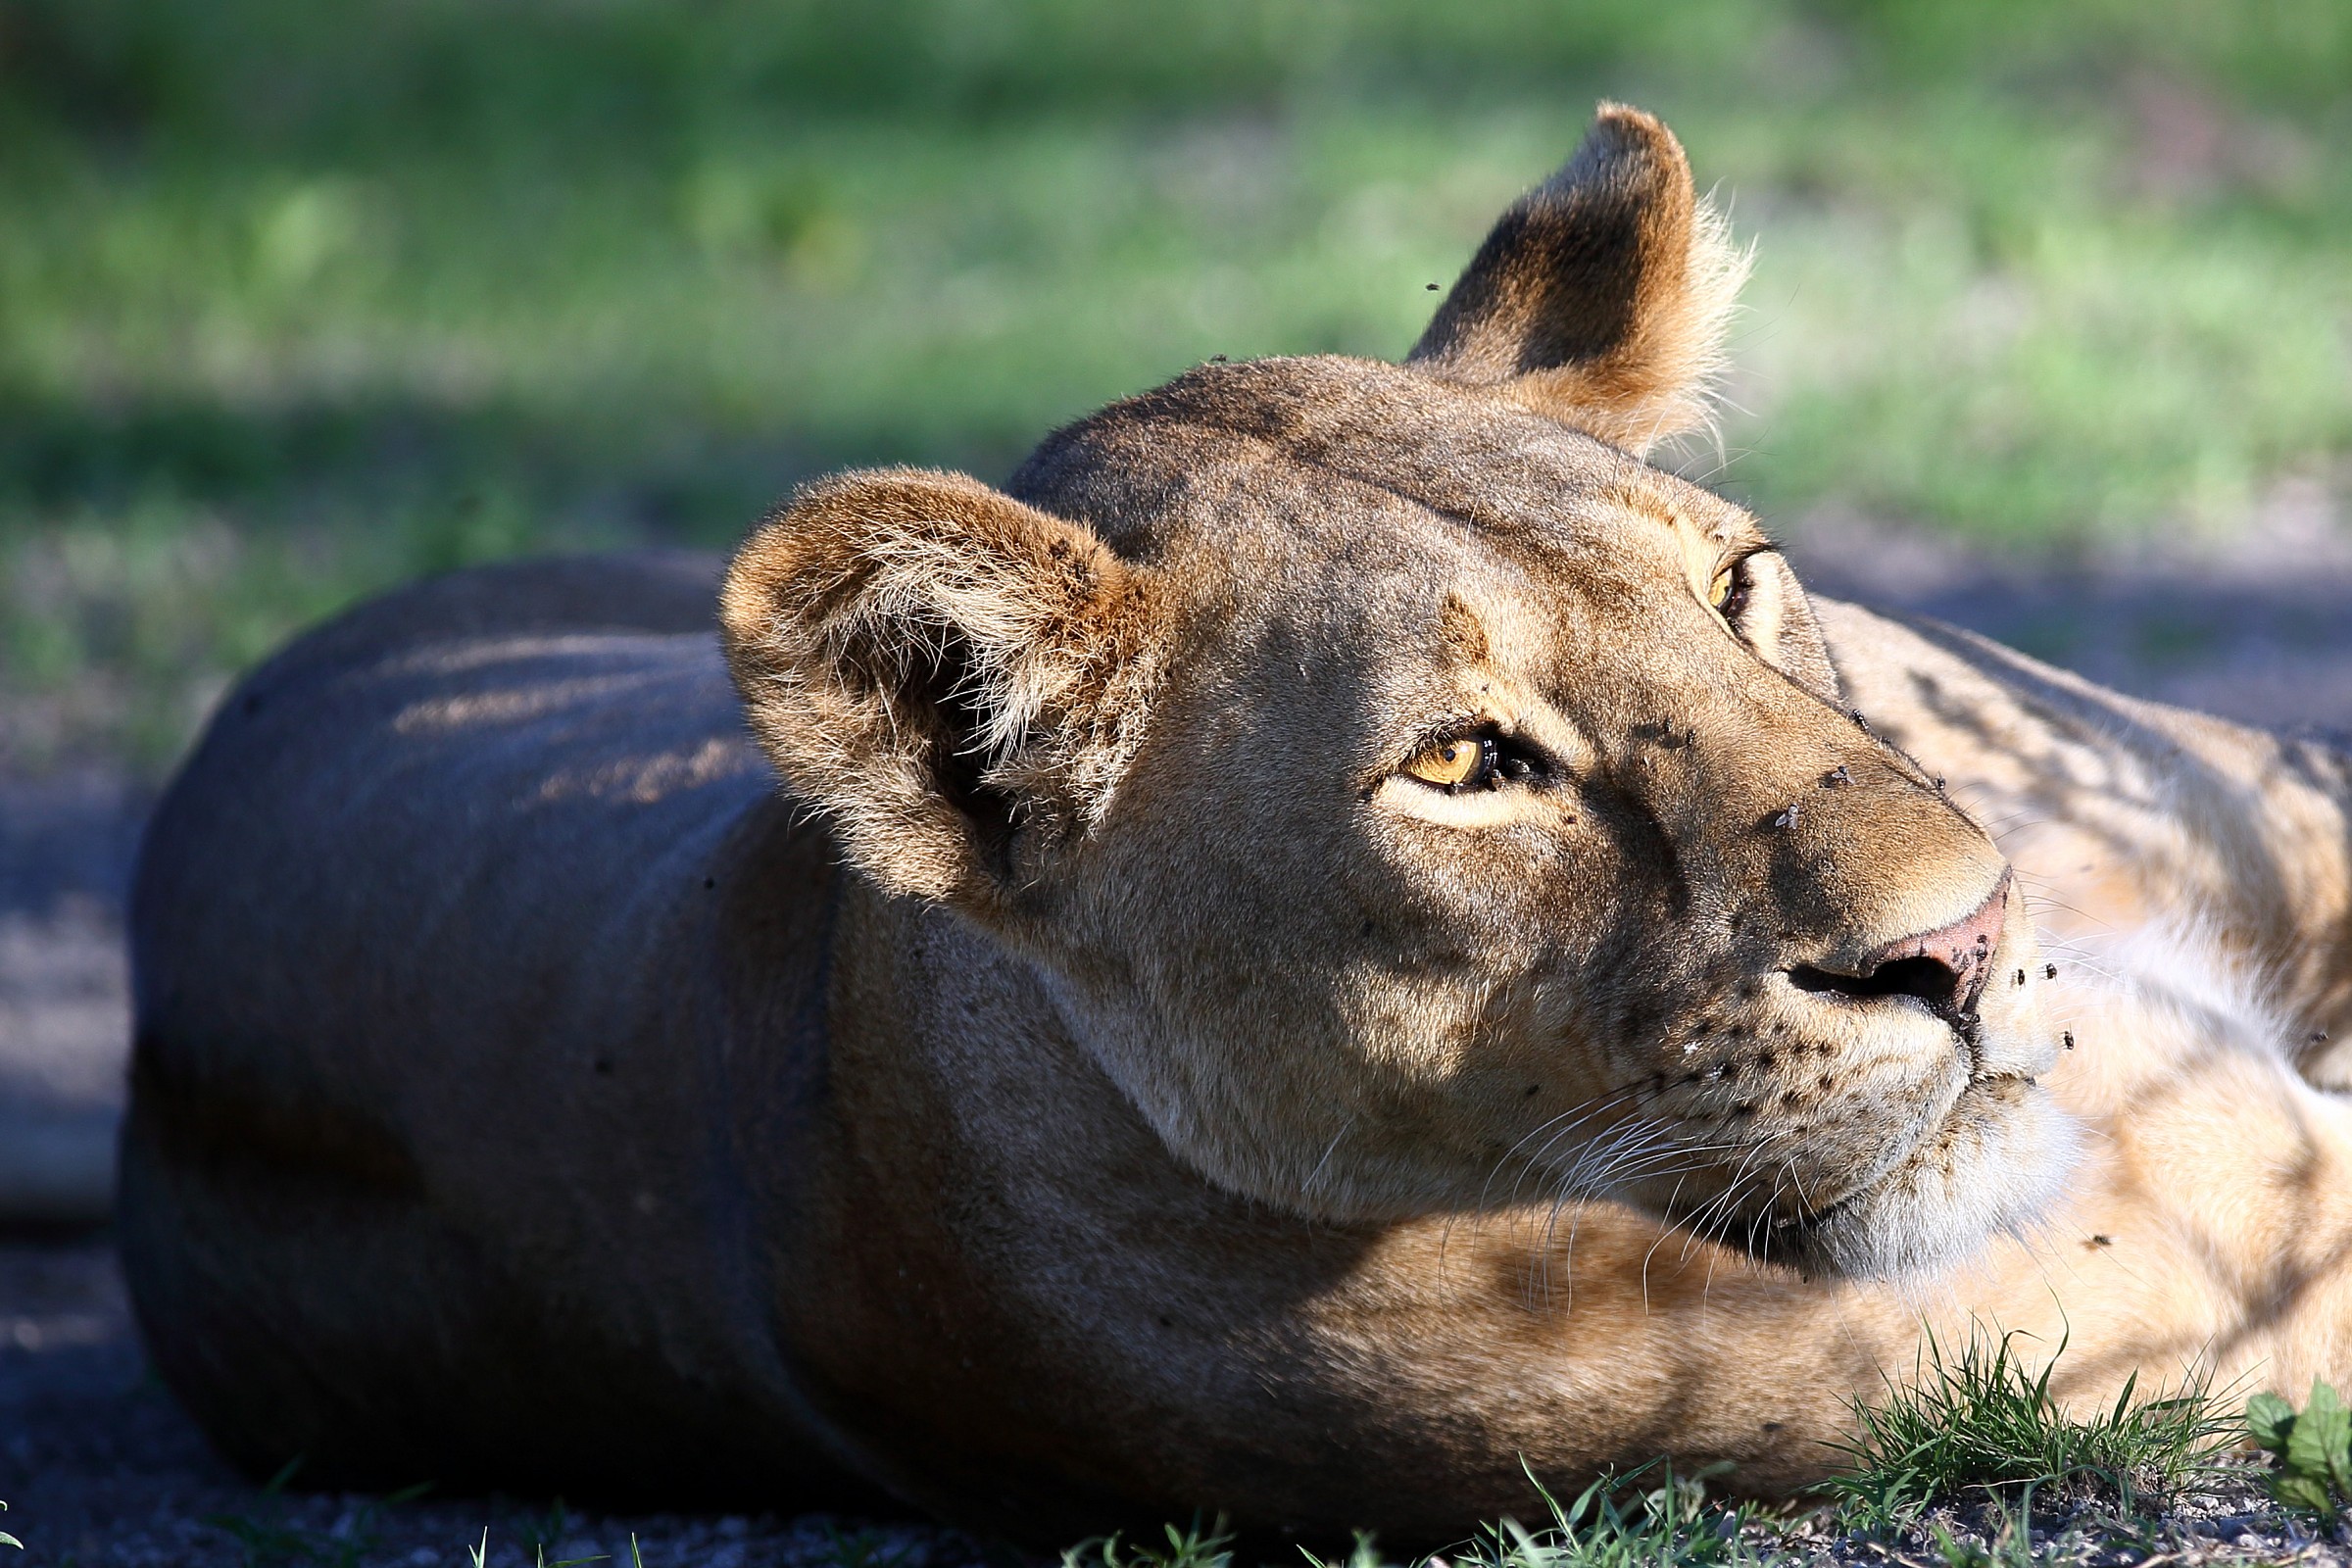 Lioness relaxing...